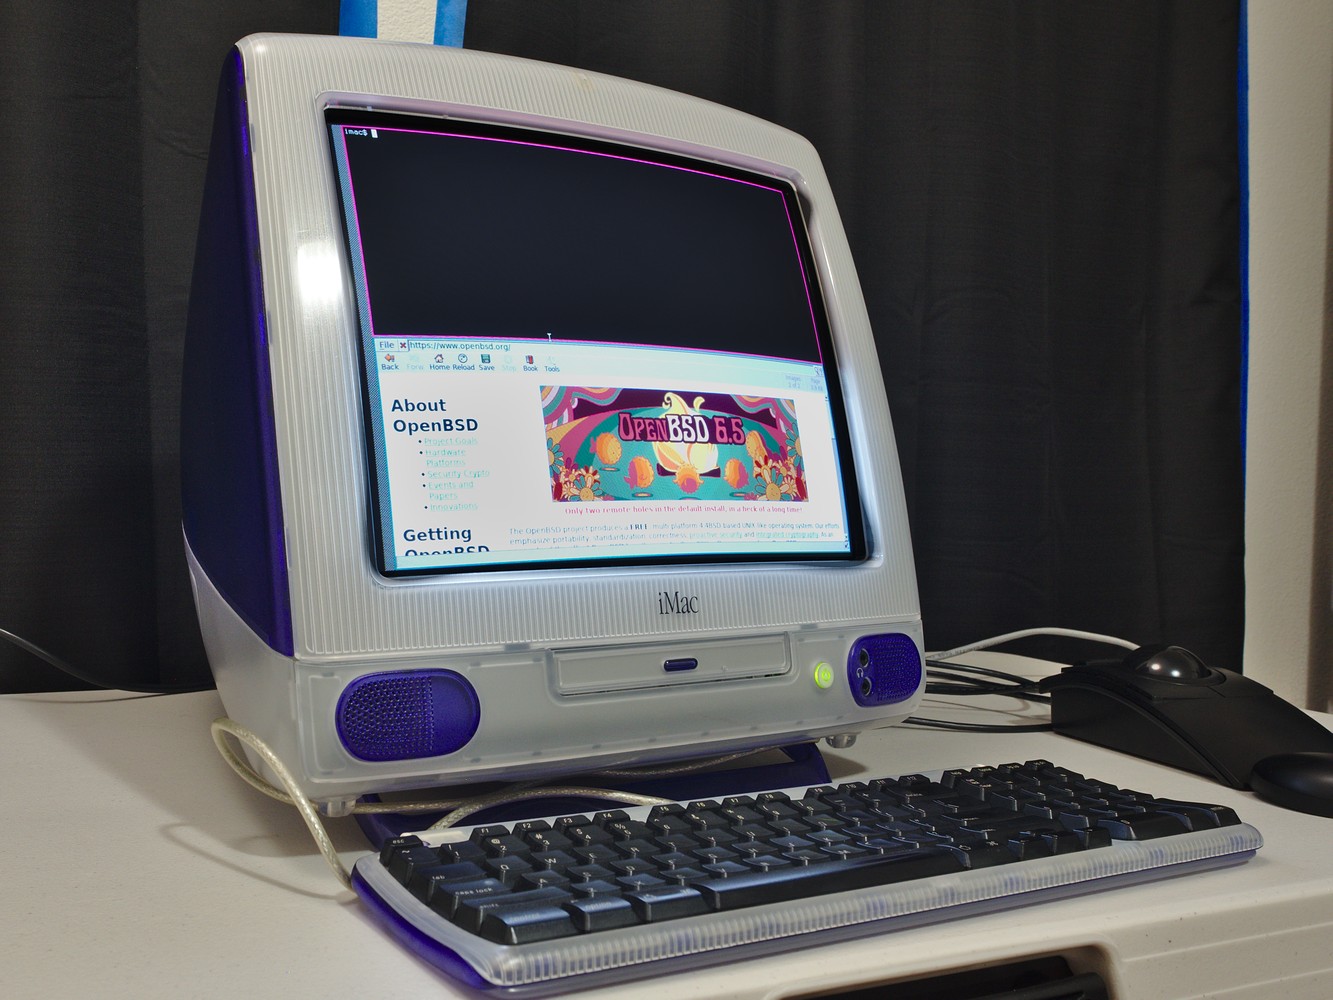 what is the best browser for imac g3